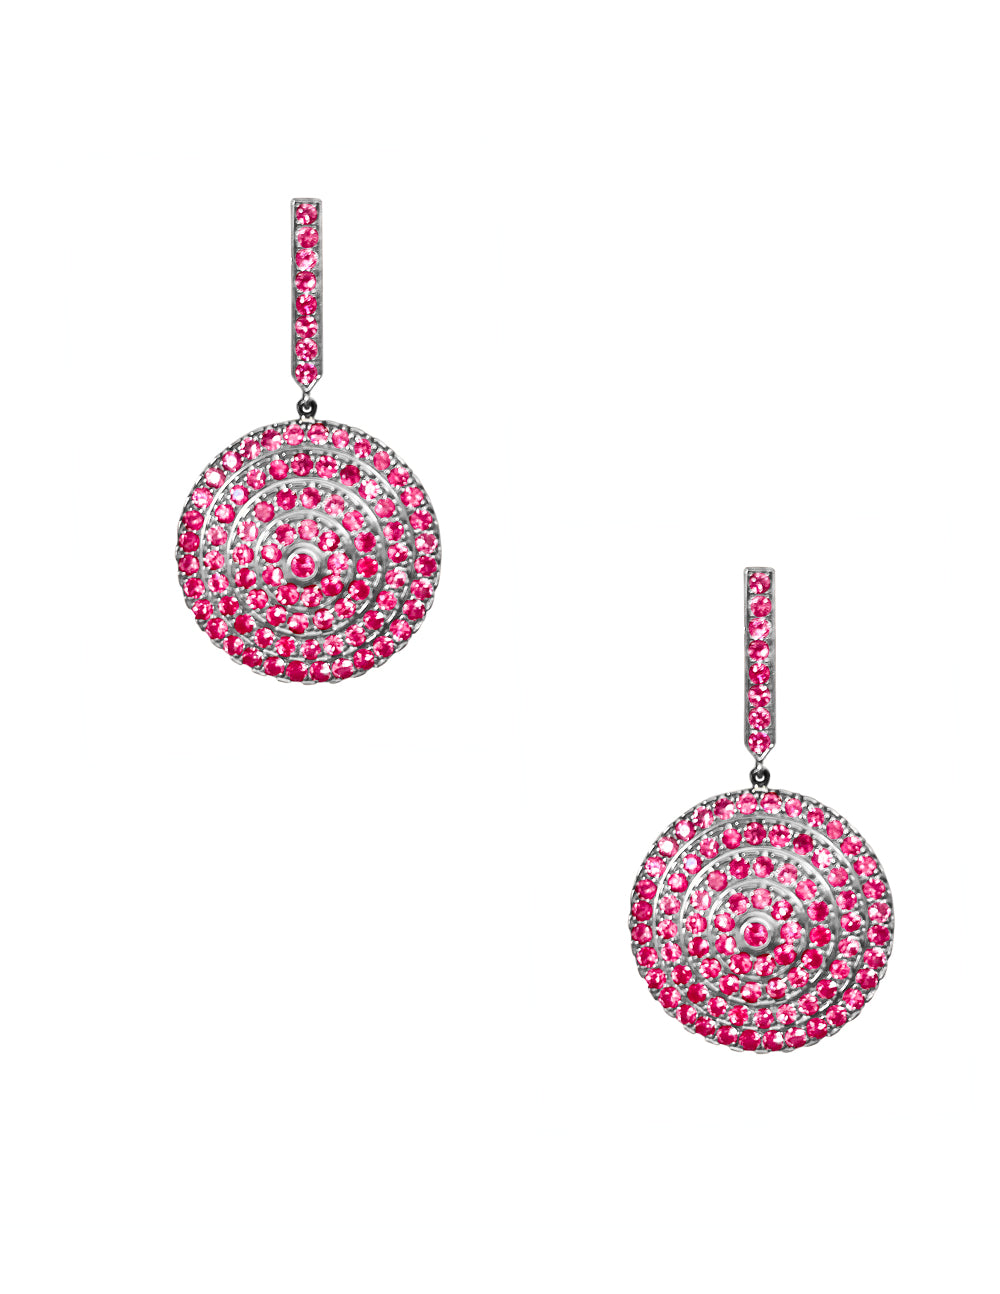 Soleil Silver Earrings with Diamonds Pink Sapphire